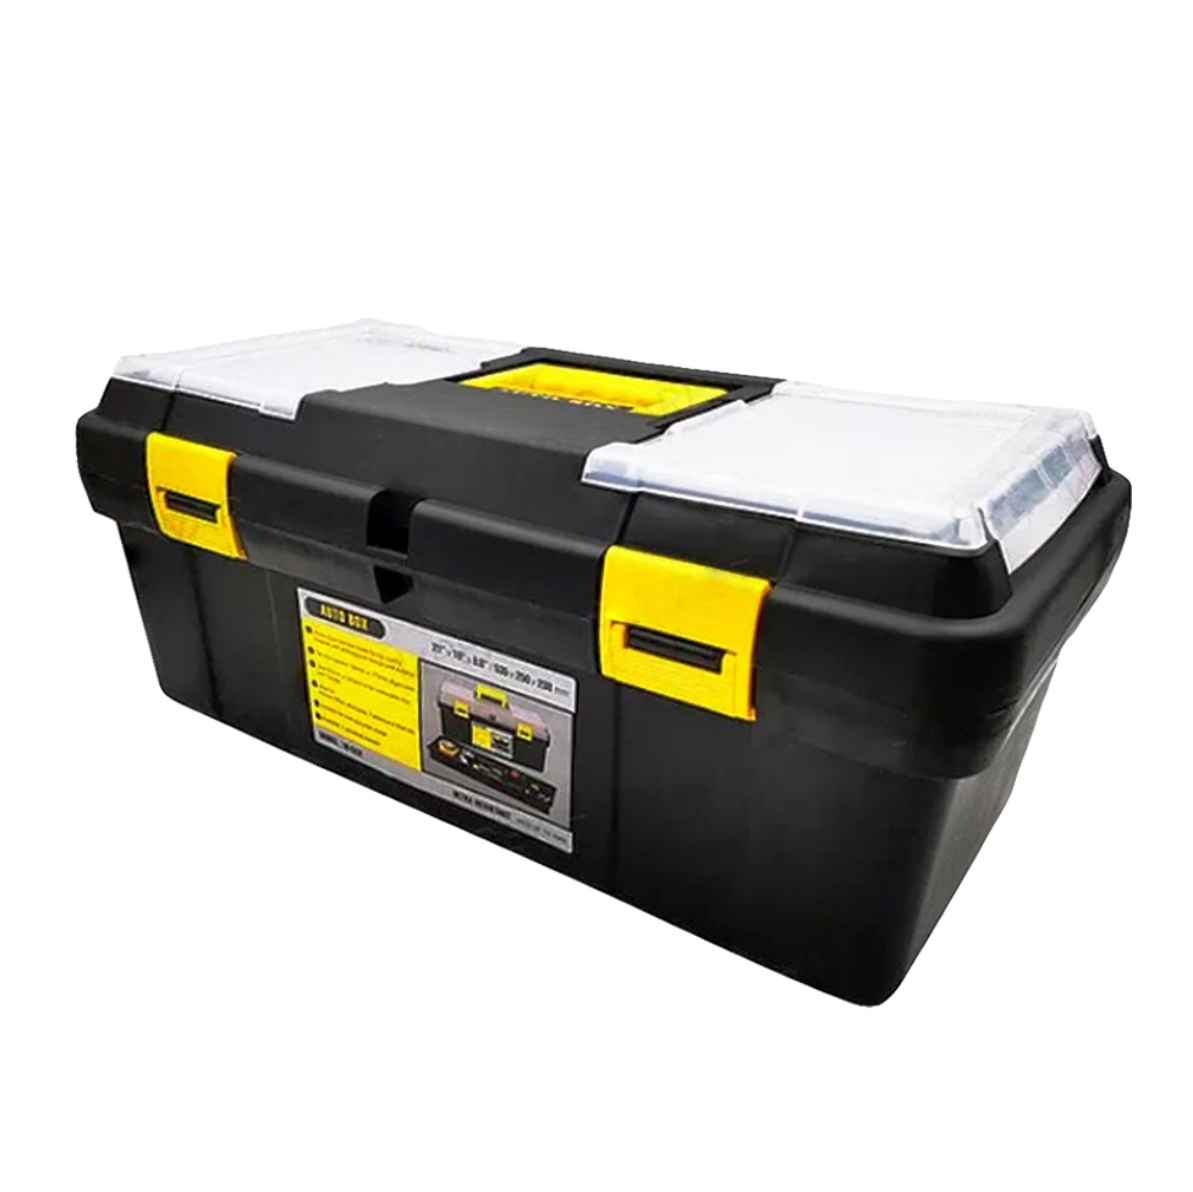 KTK 532 Tool Box With Parts Organizers 21"/535MM